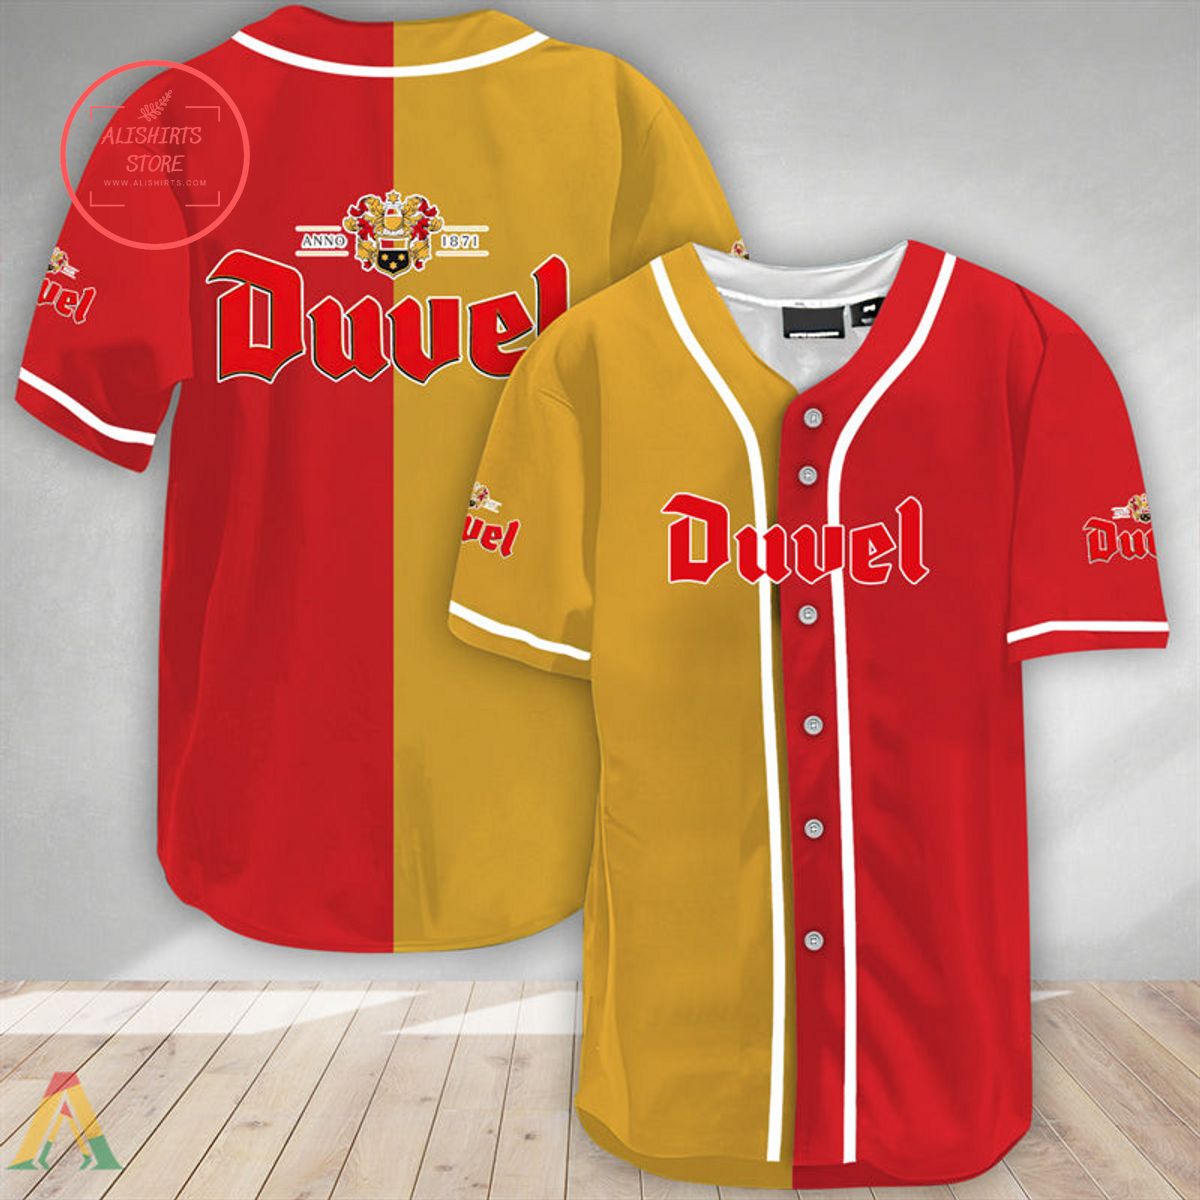 Yellow And Red Split Duvel Beer Baseball Jersey